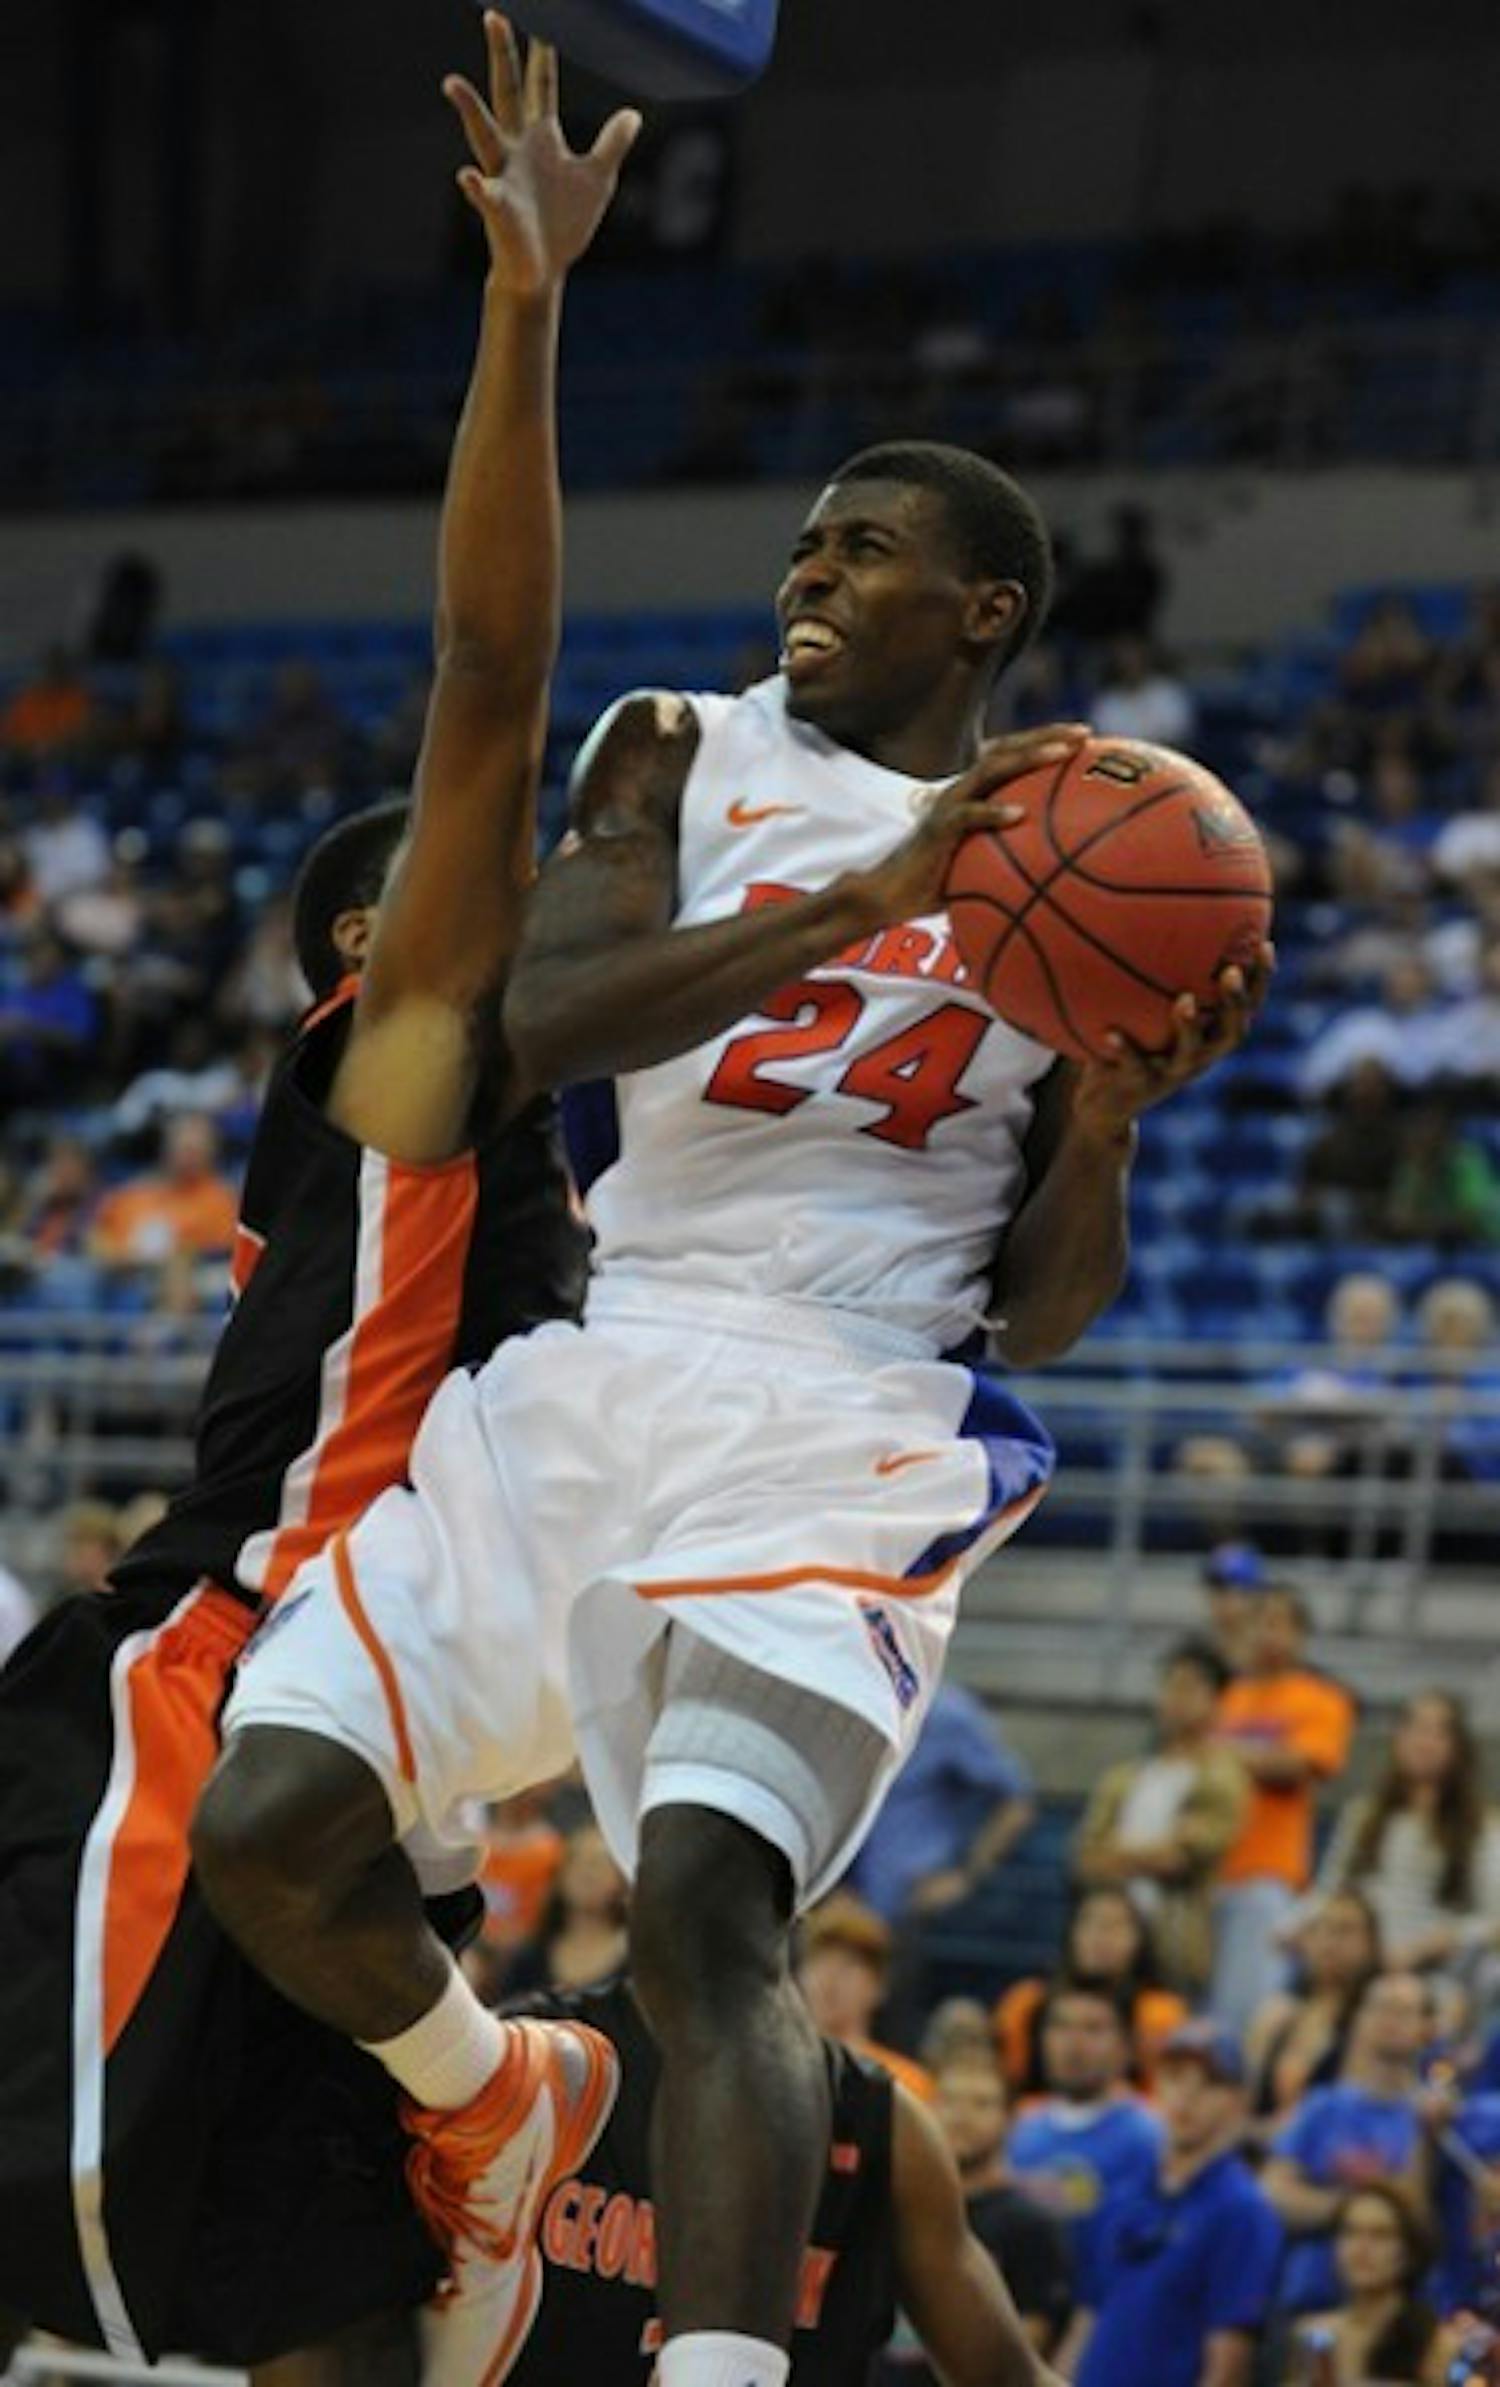 Florida sophomore forward Casey Prather finished his freshman campaign with more turnovers (18) than field goals (17).